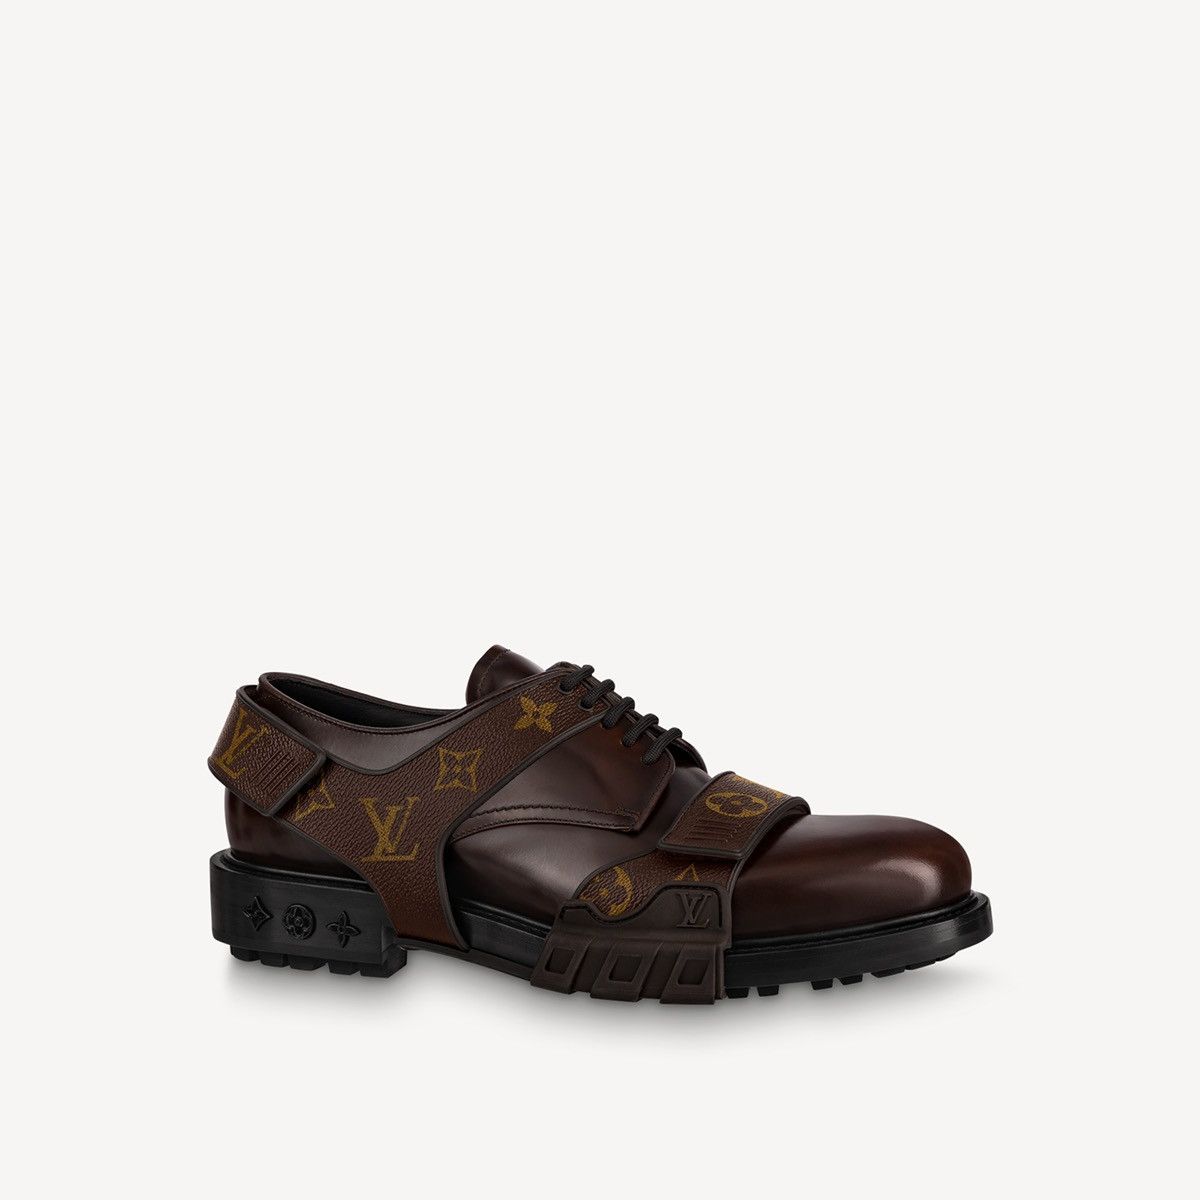 LOUIS VUITTON DERBY HARNESS - shoes lovers